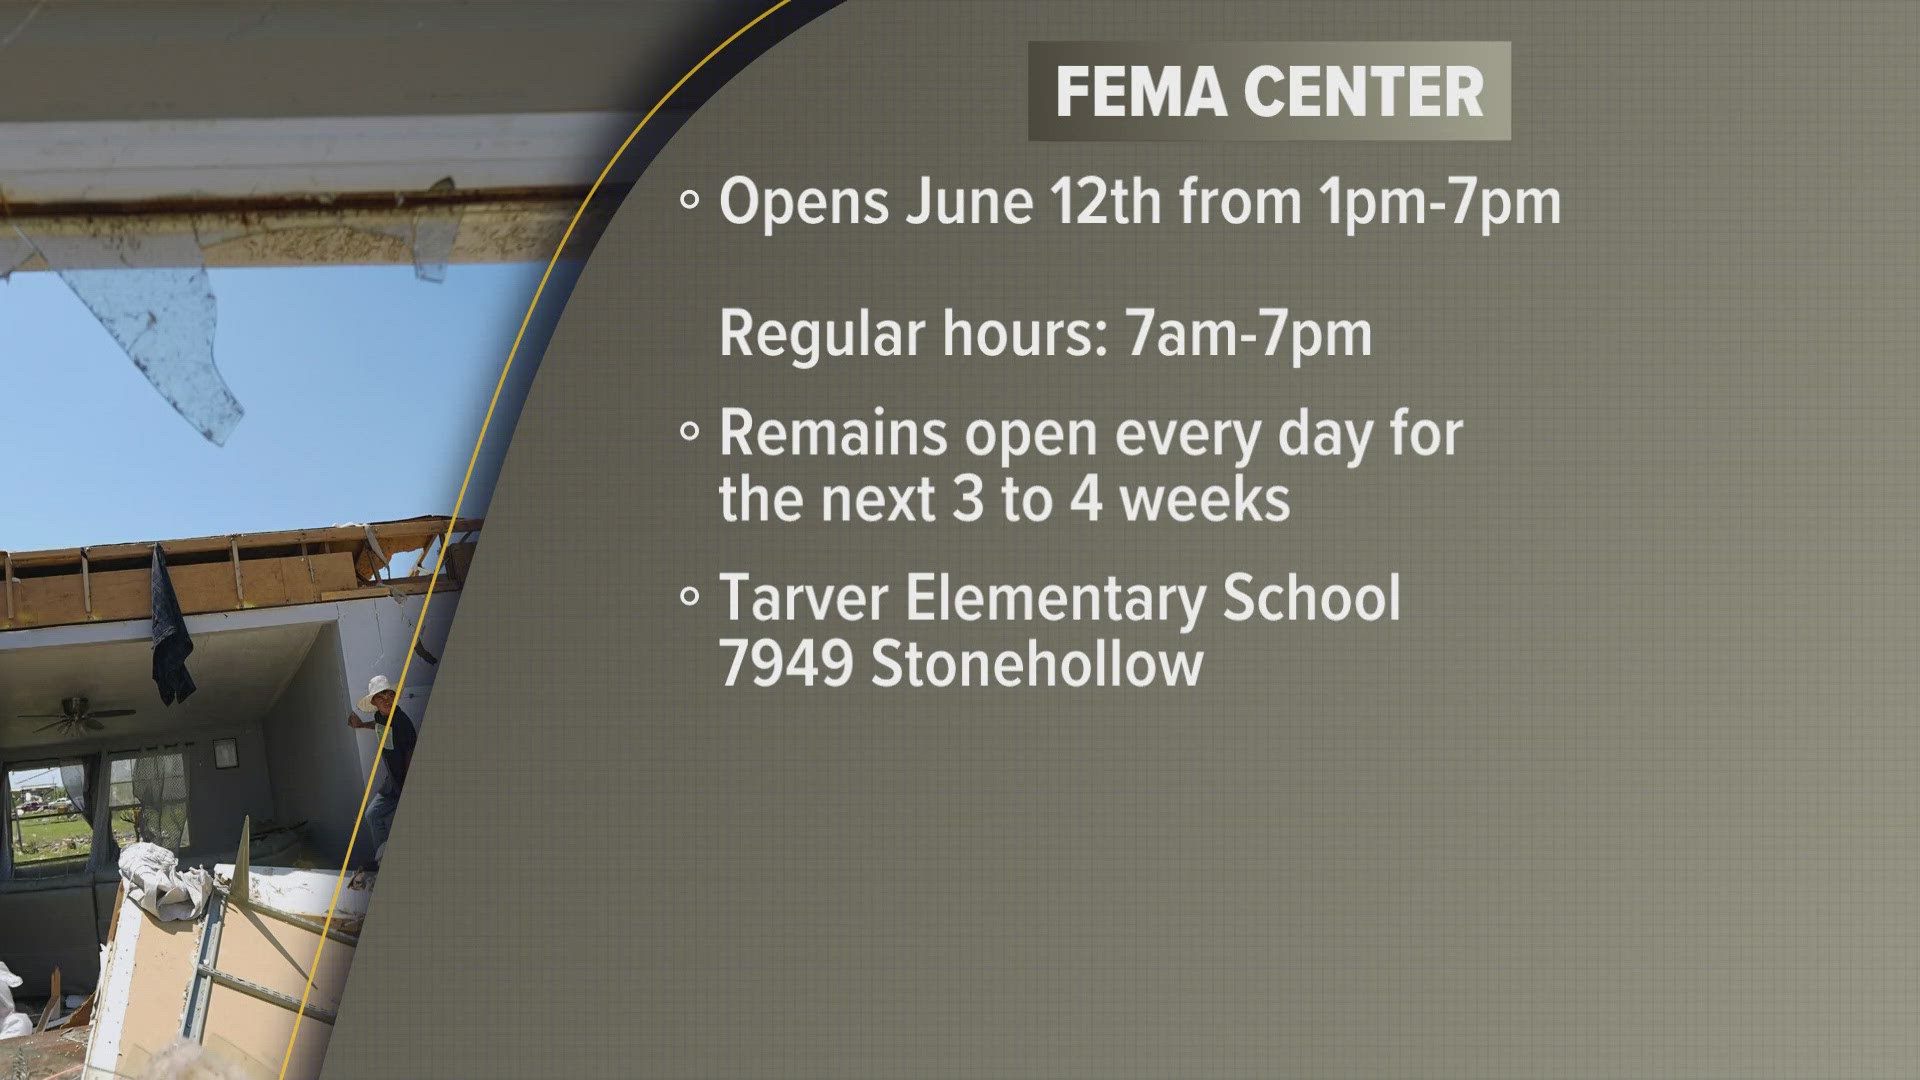 This center will be providing assistance to those impacted by the tornado and severe weather that destroyed the region on May 22.